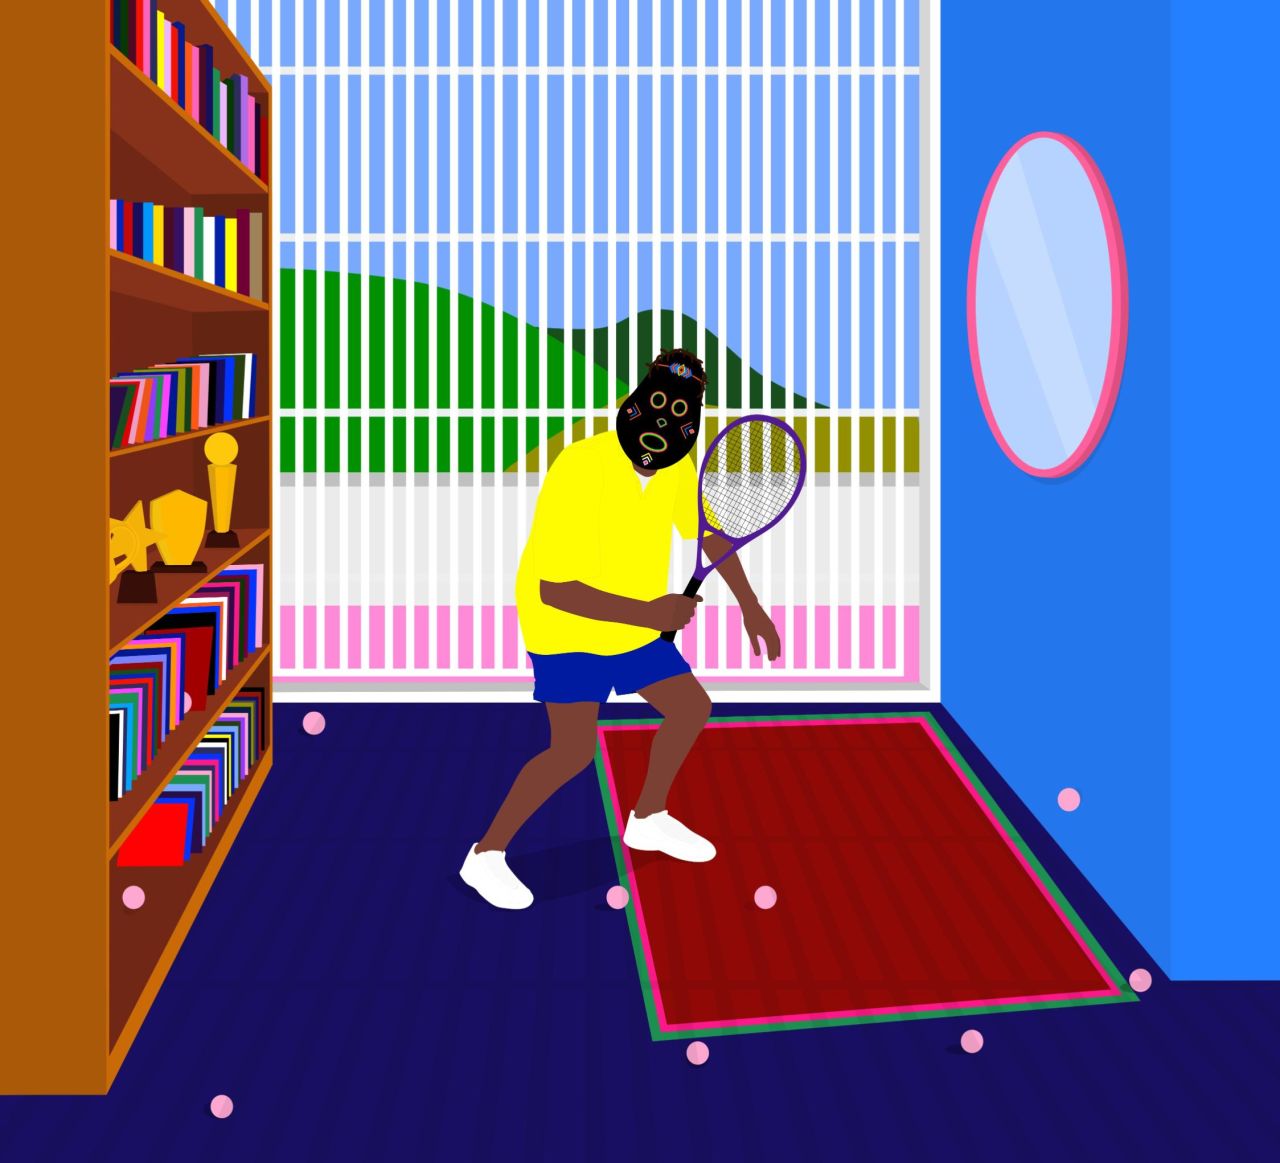 "Exercise Indoors" (2020) is part of a series of paintings Osadebe made of figures playing tennis indoors during the pandemic. He was inspired by his father, a tennis fan, trying to exercise at home.